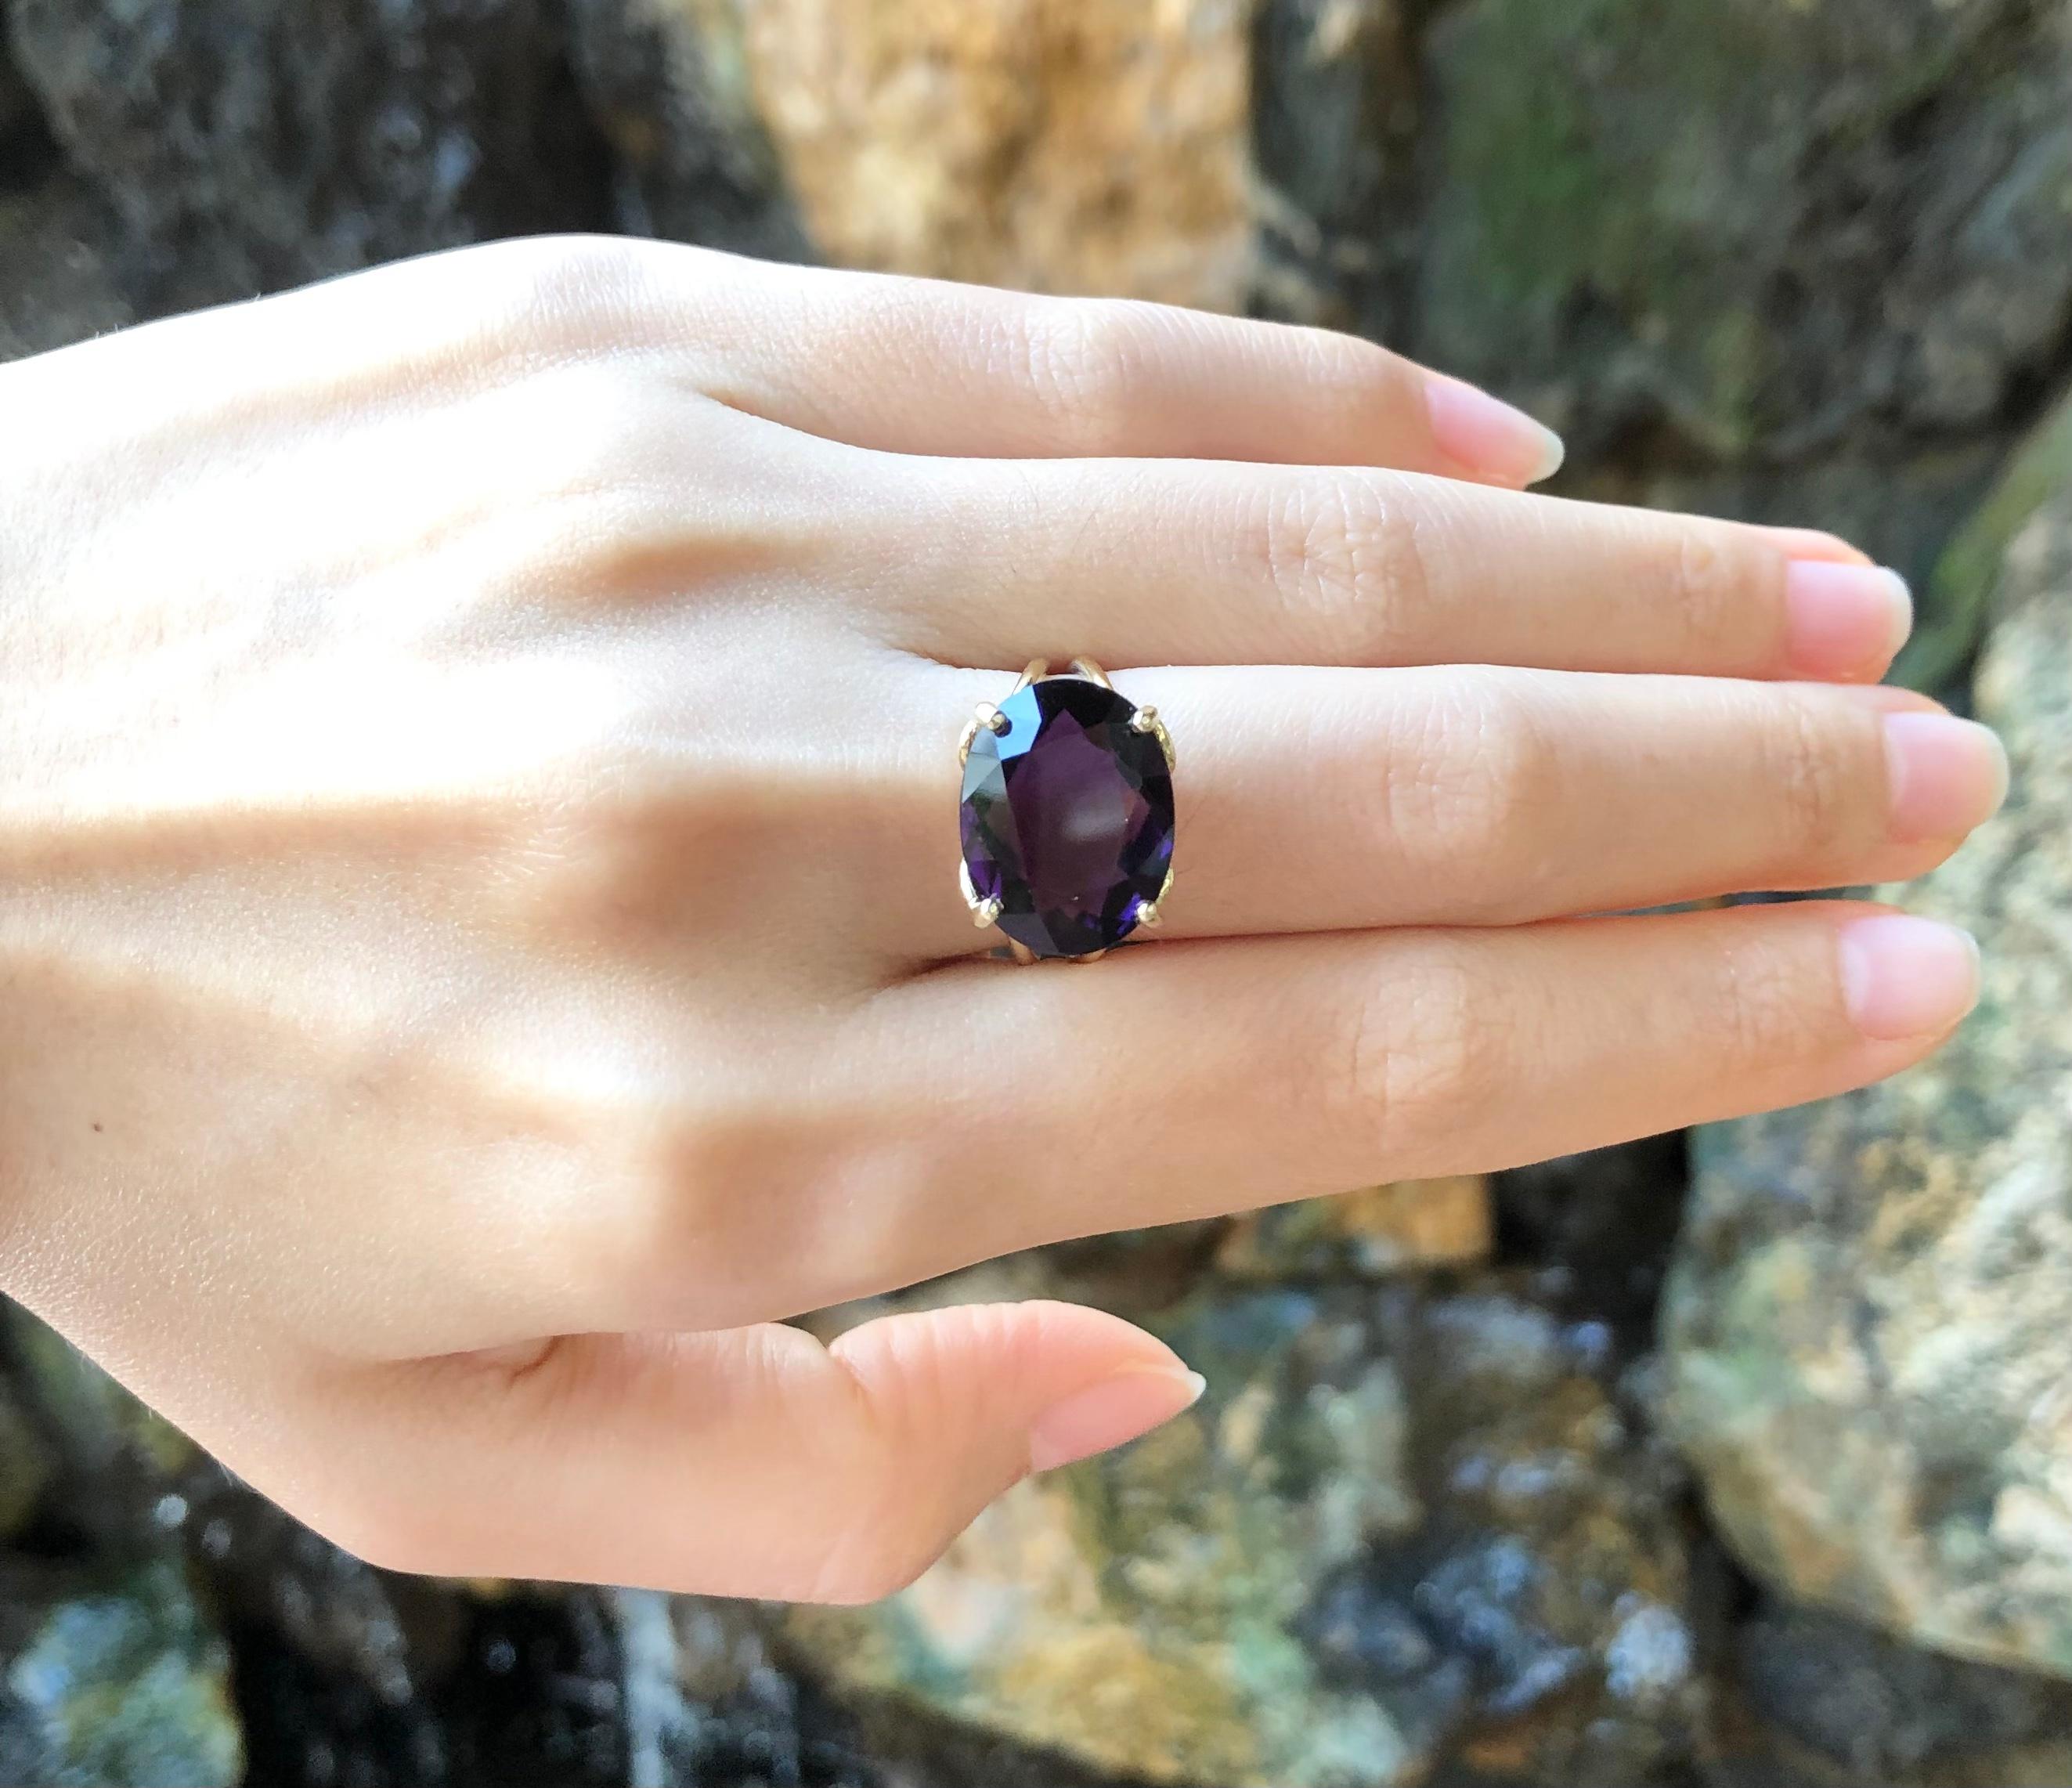 Amethyst 8.77 carats Ring set in 14 Karat Gold Settings

Width:  1.5 cm 
Length: 1.1 cm
Ring Size: 52
Total Weight: 5.13 grams


